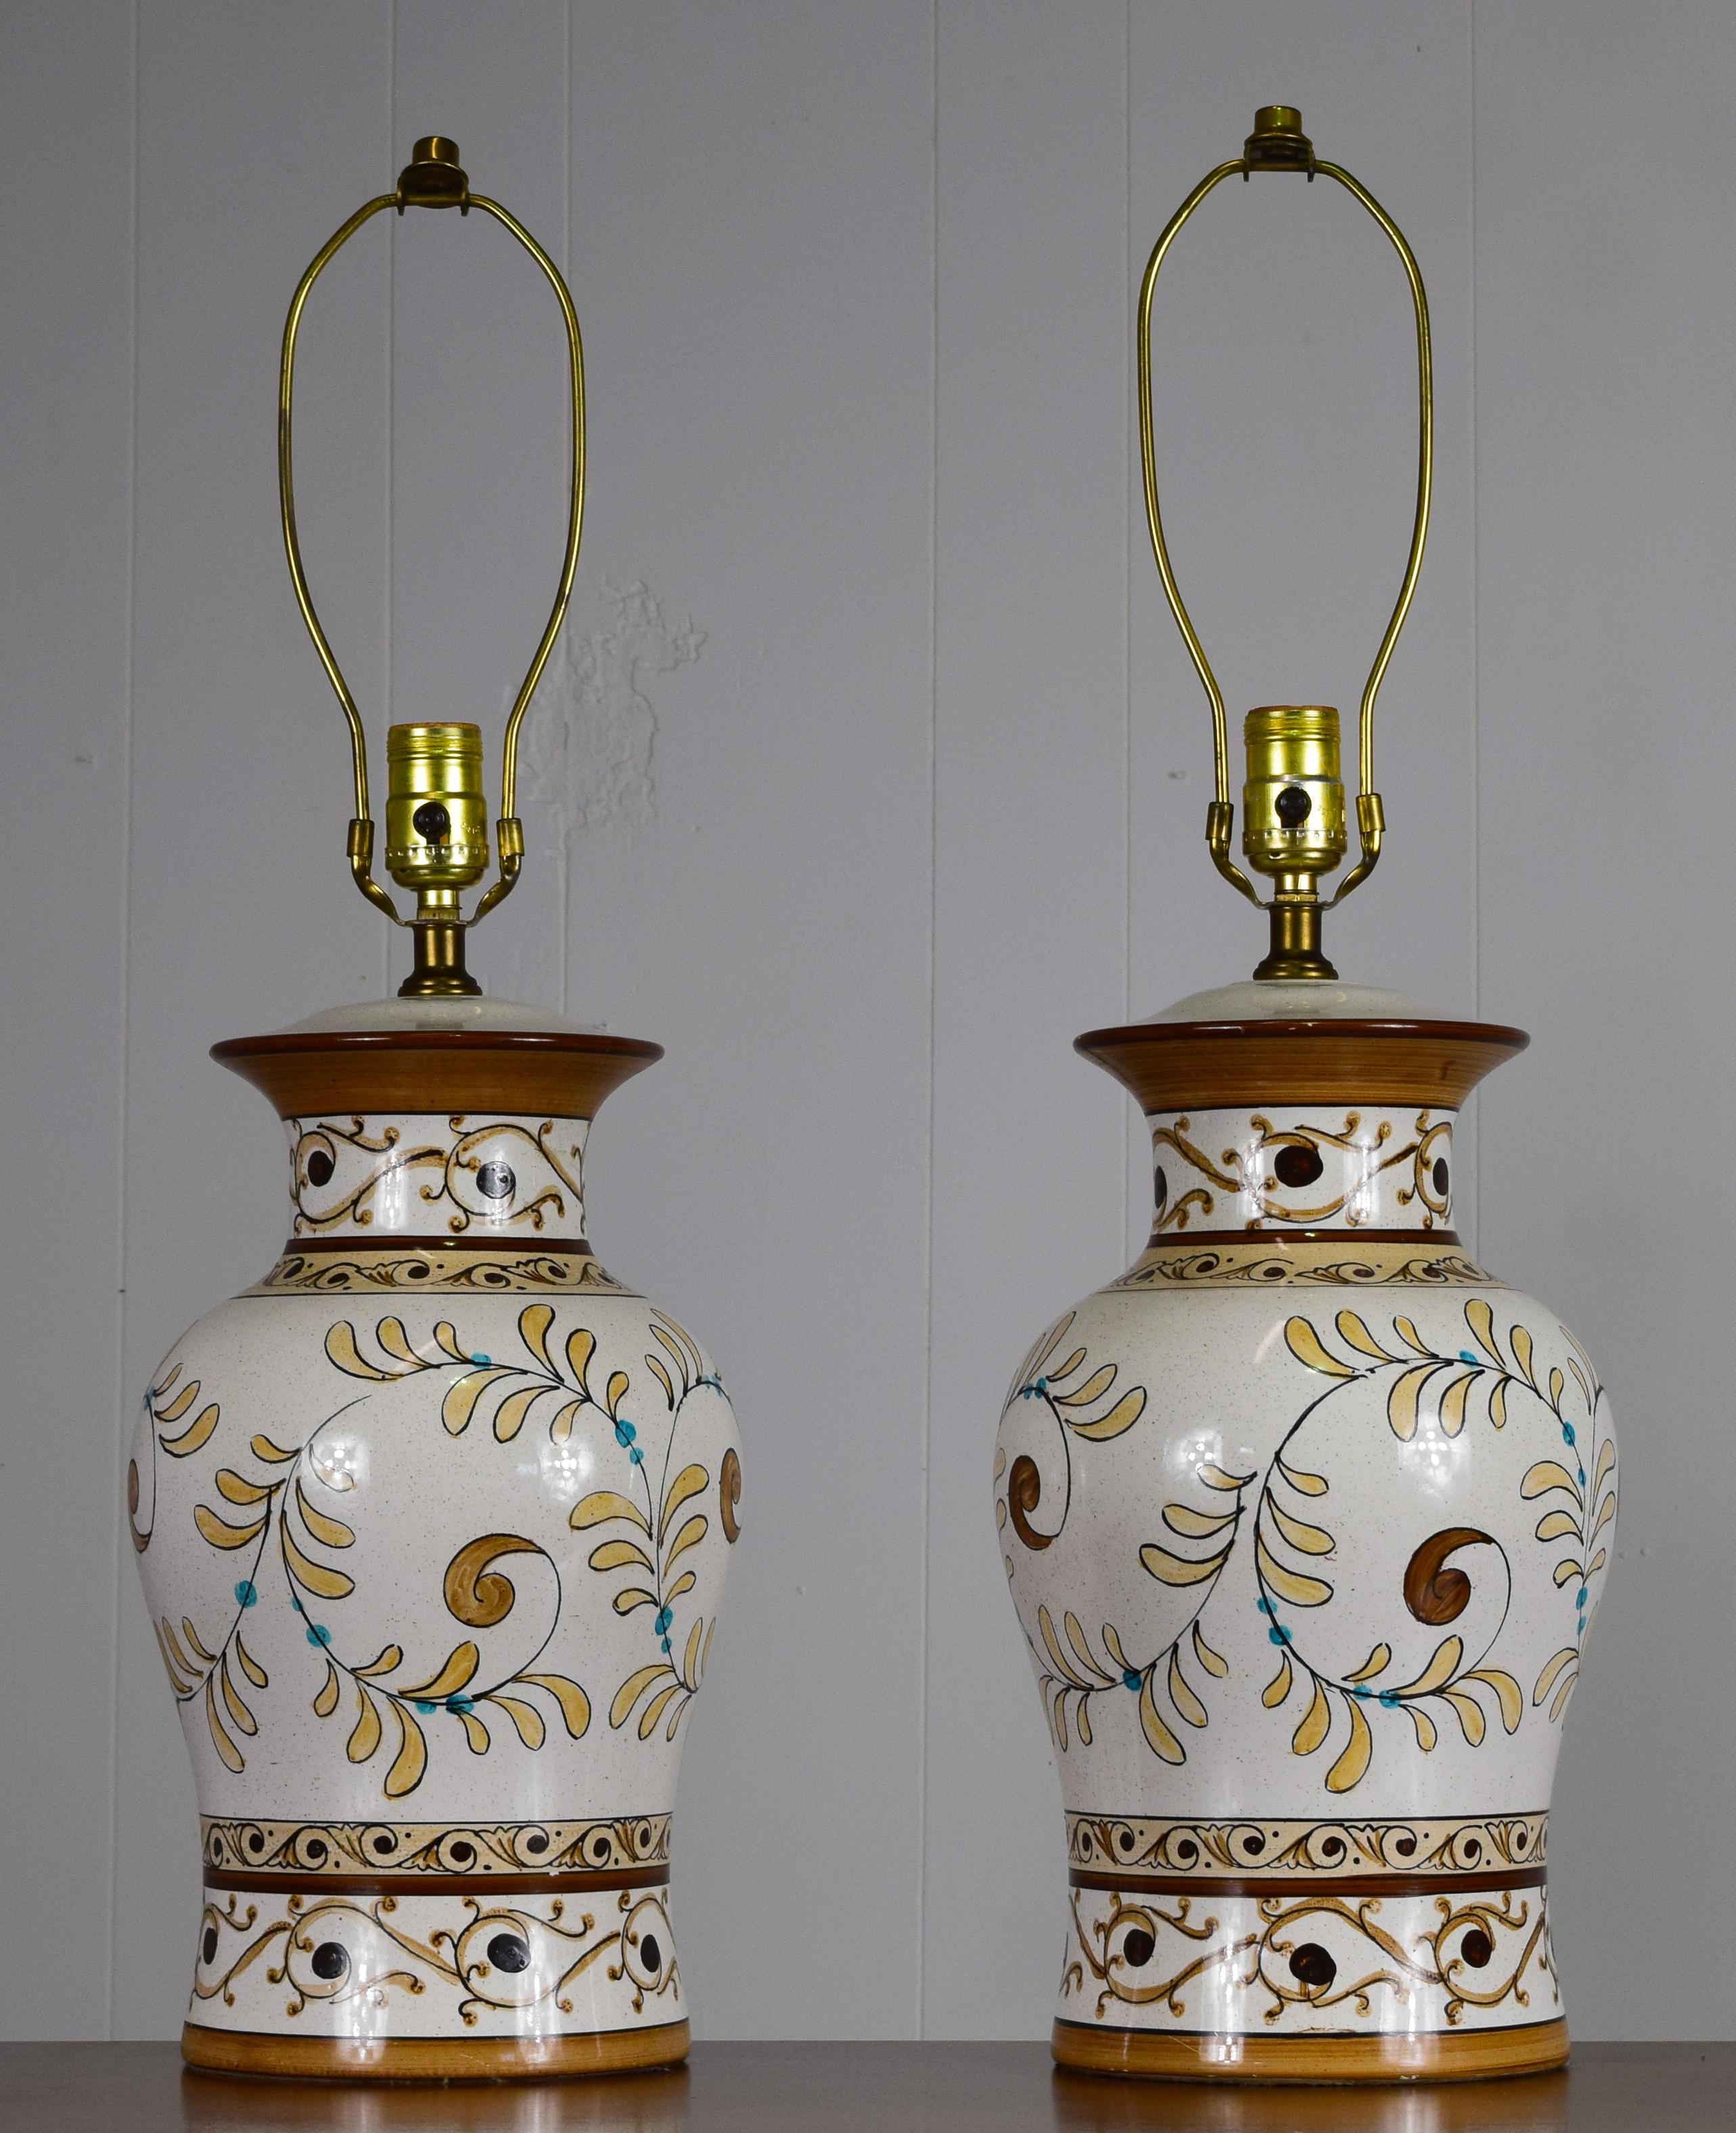 Italian, circa 1960/ Lovely pair of Majolica table lamps shaped like urns produced with ceramic, with sgraffito line work and glaze applied. In perfect condition with 3 way power. Completely unique and handcrafted artisan pieces. Shades are newer,